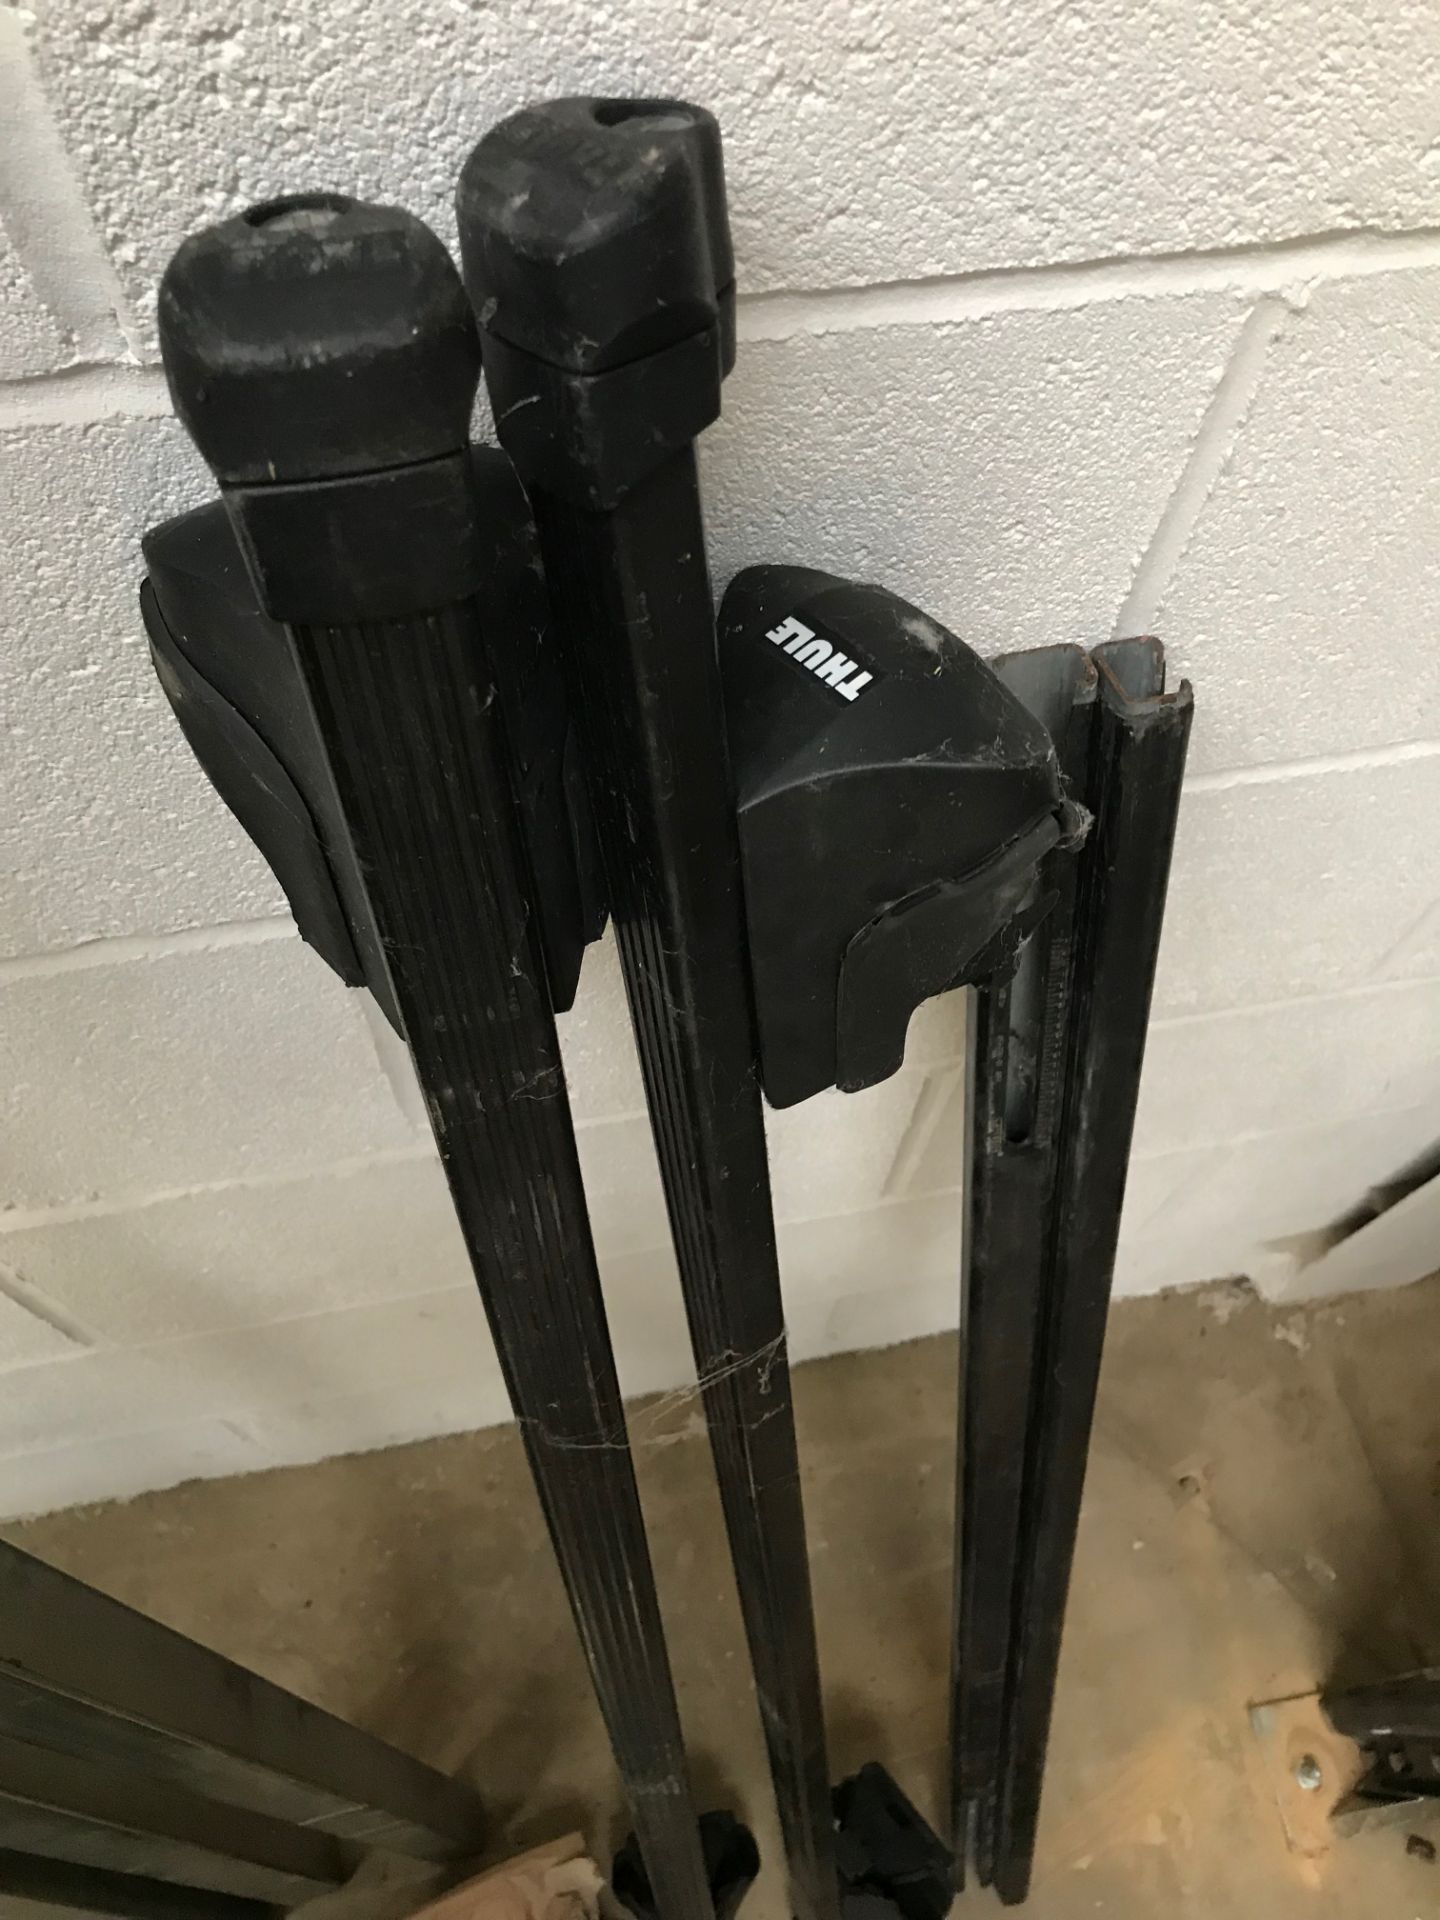 Thule Roof Racks - Collection of 3 Roof Racks - Image 6 of 6